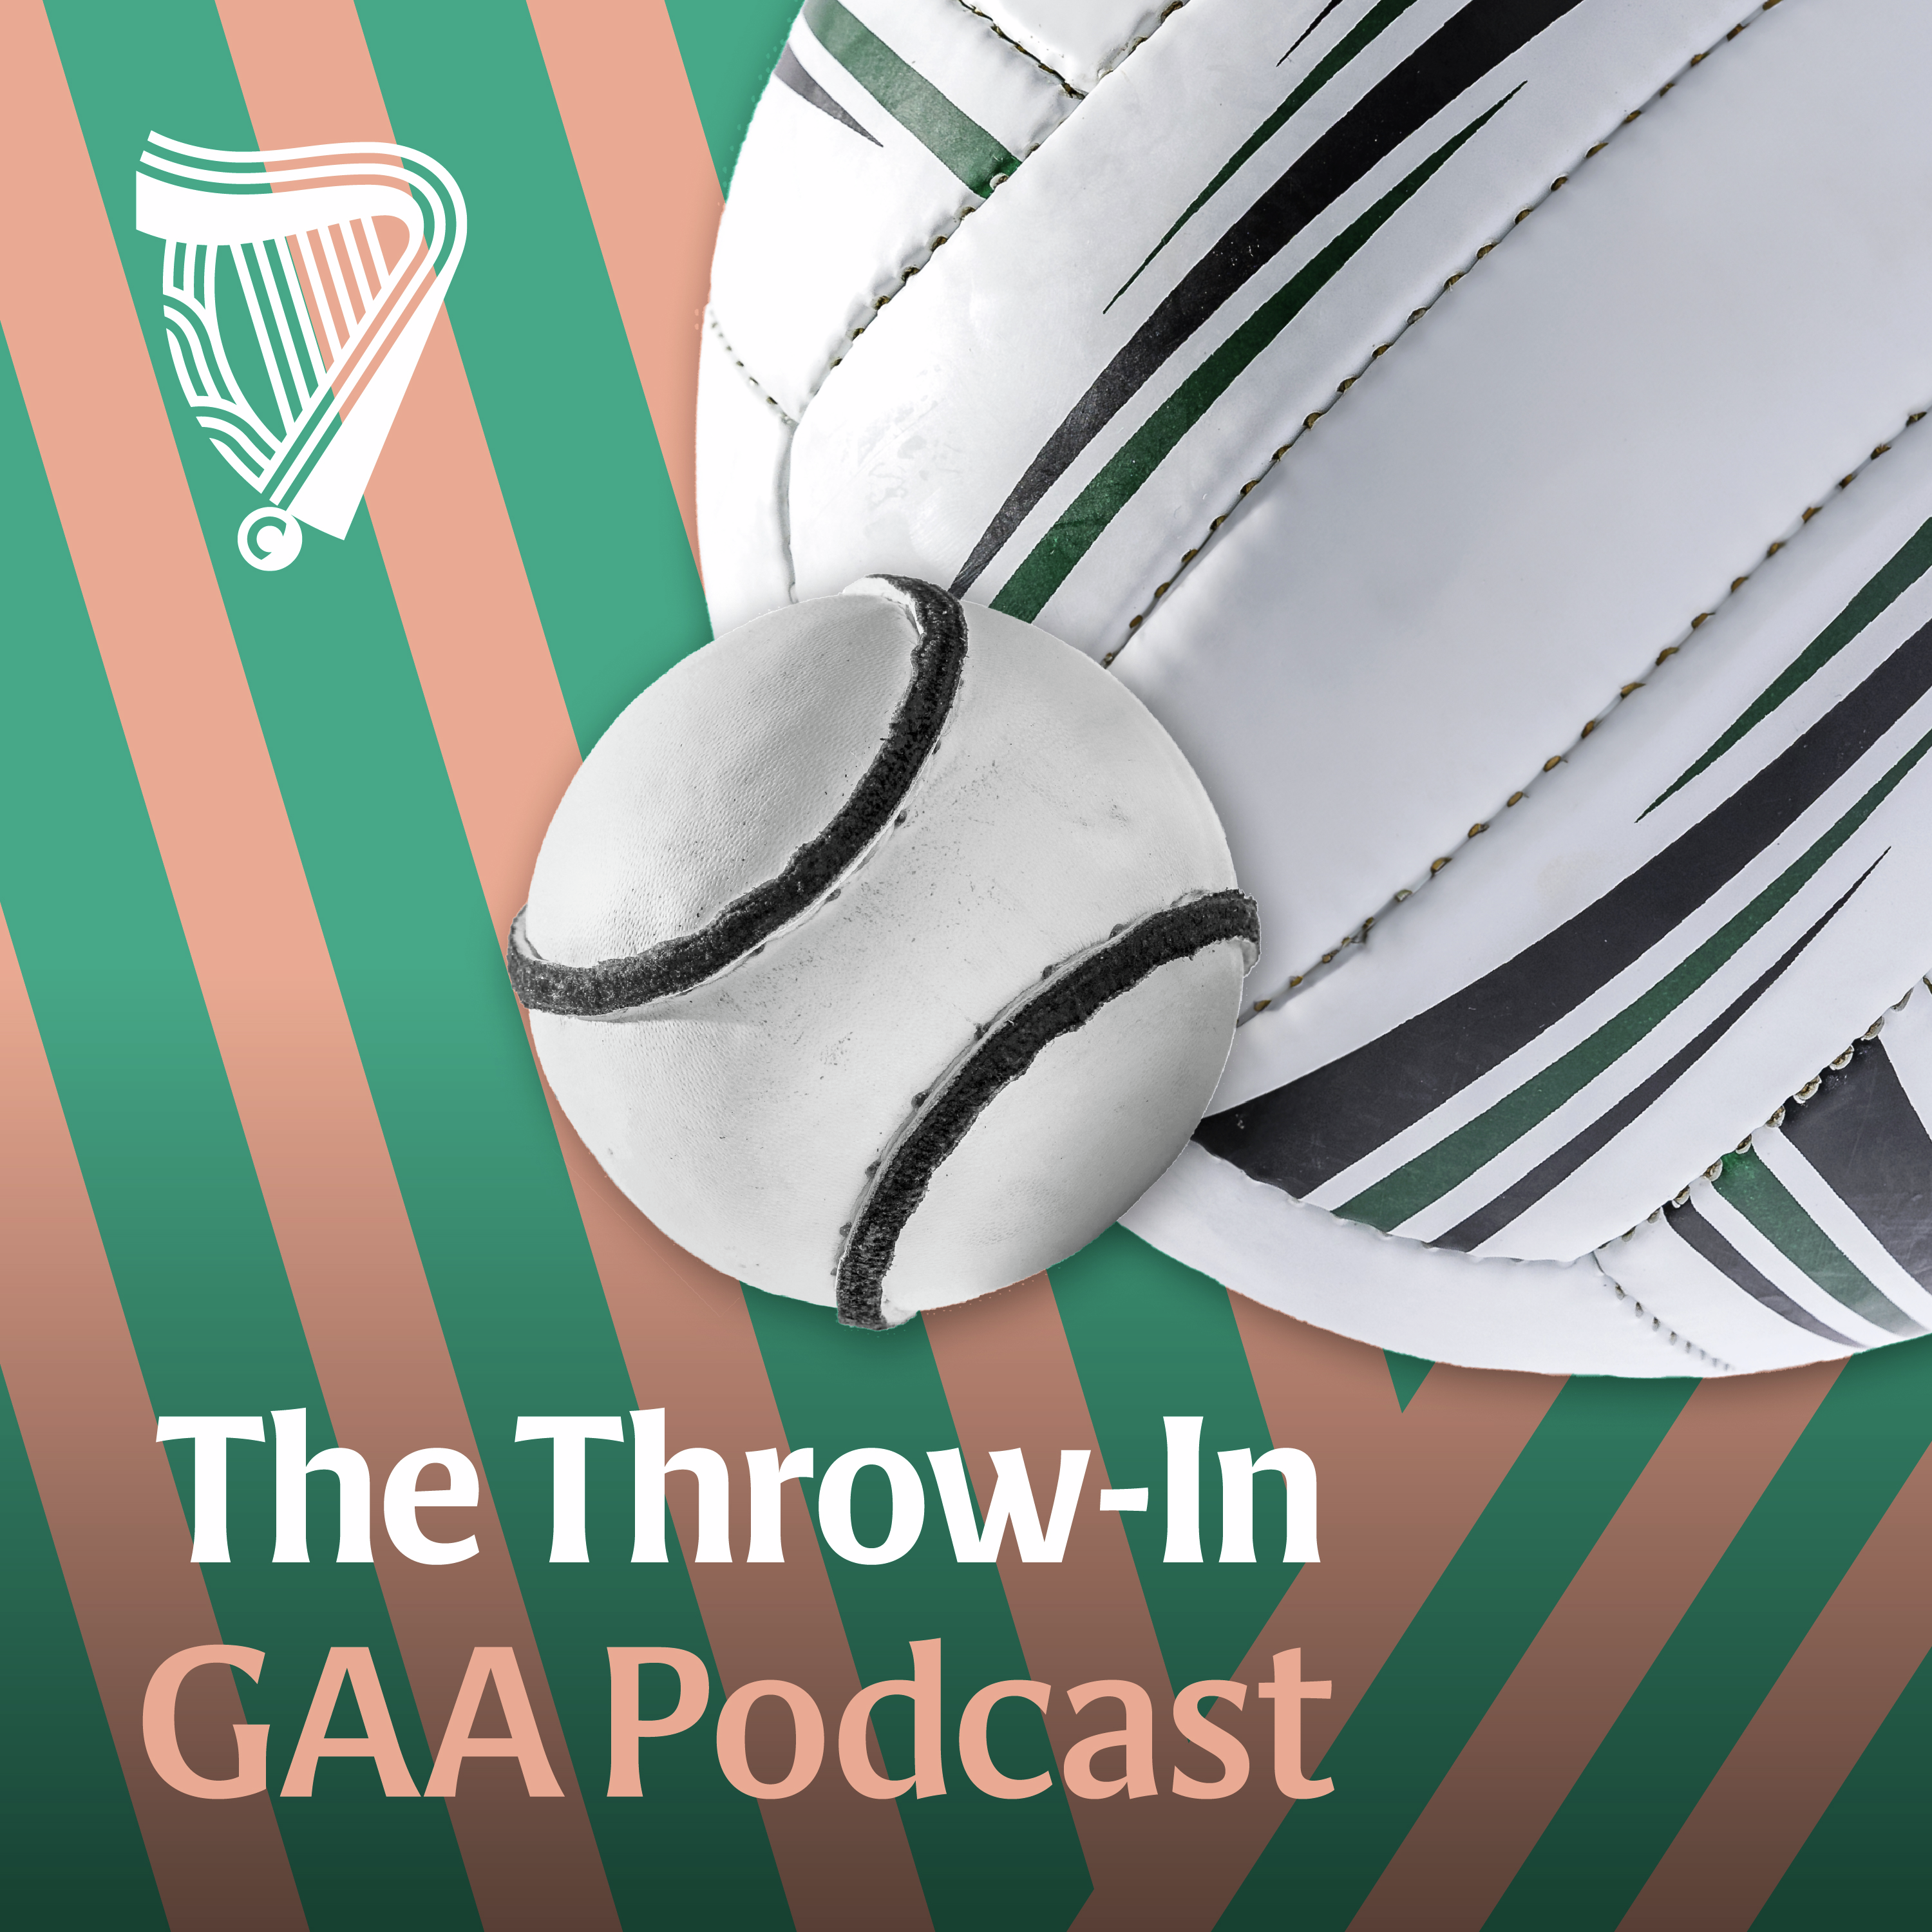 Breaking Ball with Philly McMahon: Kevin Doyle on his GAA crossroads, Willie White and Philly McMahon on Ballymun